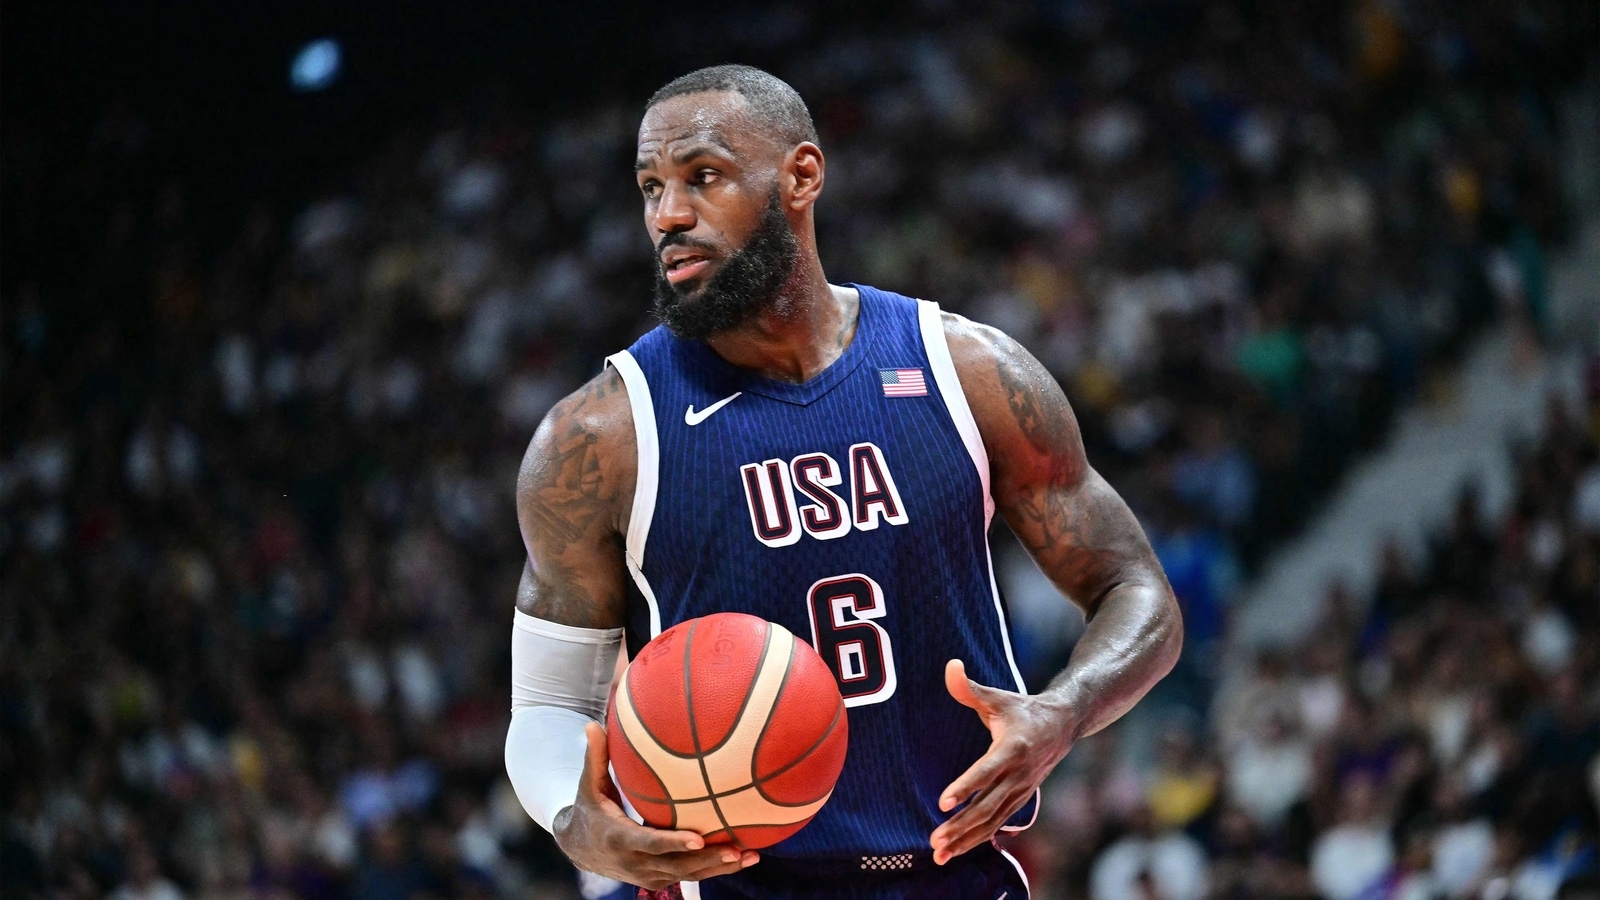 What’s next for Team USA after LeBron James’ Sat. game-winning point? Exhibition finale schedule, flag bearer revealed